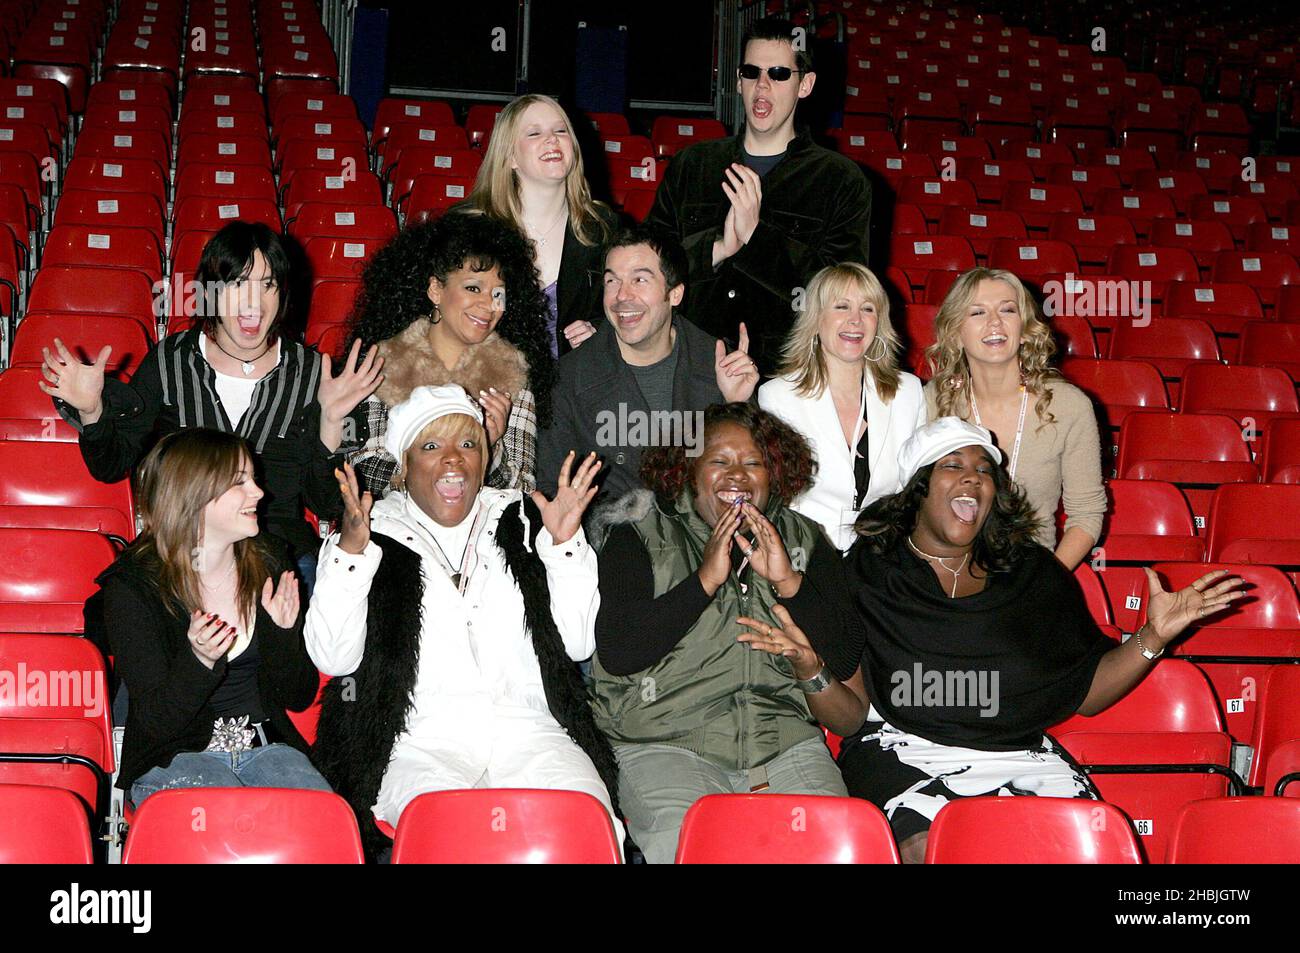 2 To Go; Tabby Callaghan; Rowetta Satchell; Steve Brookstein; Verity Keays; Roberta Howett; Cassie Compton; Voices with Soul pose at a photocall ahead of this evening's 'X Factor Live Tour' first night at Wembley Arena Pavilion on February 20, 2005 in London. Stock Photo